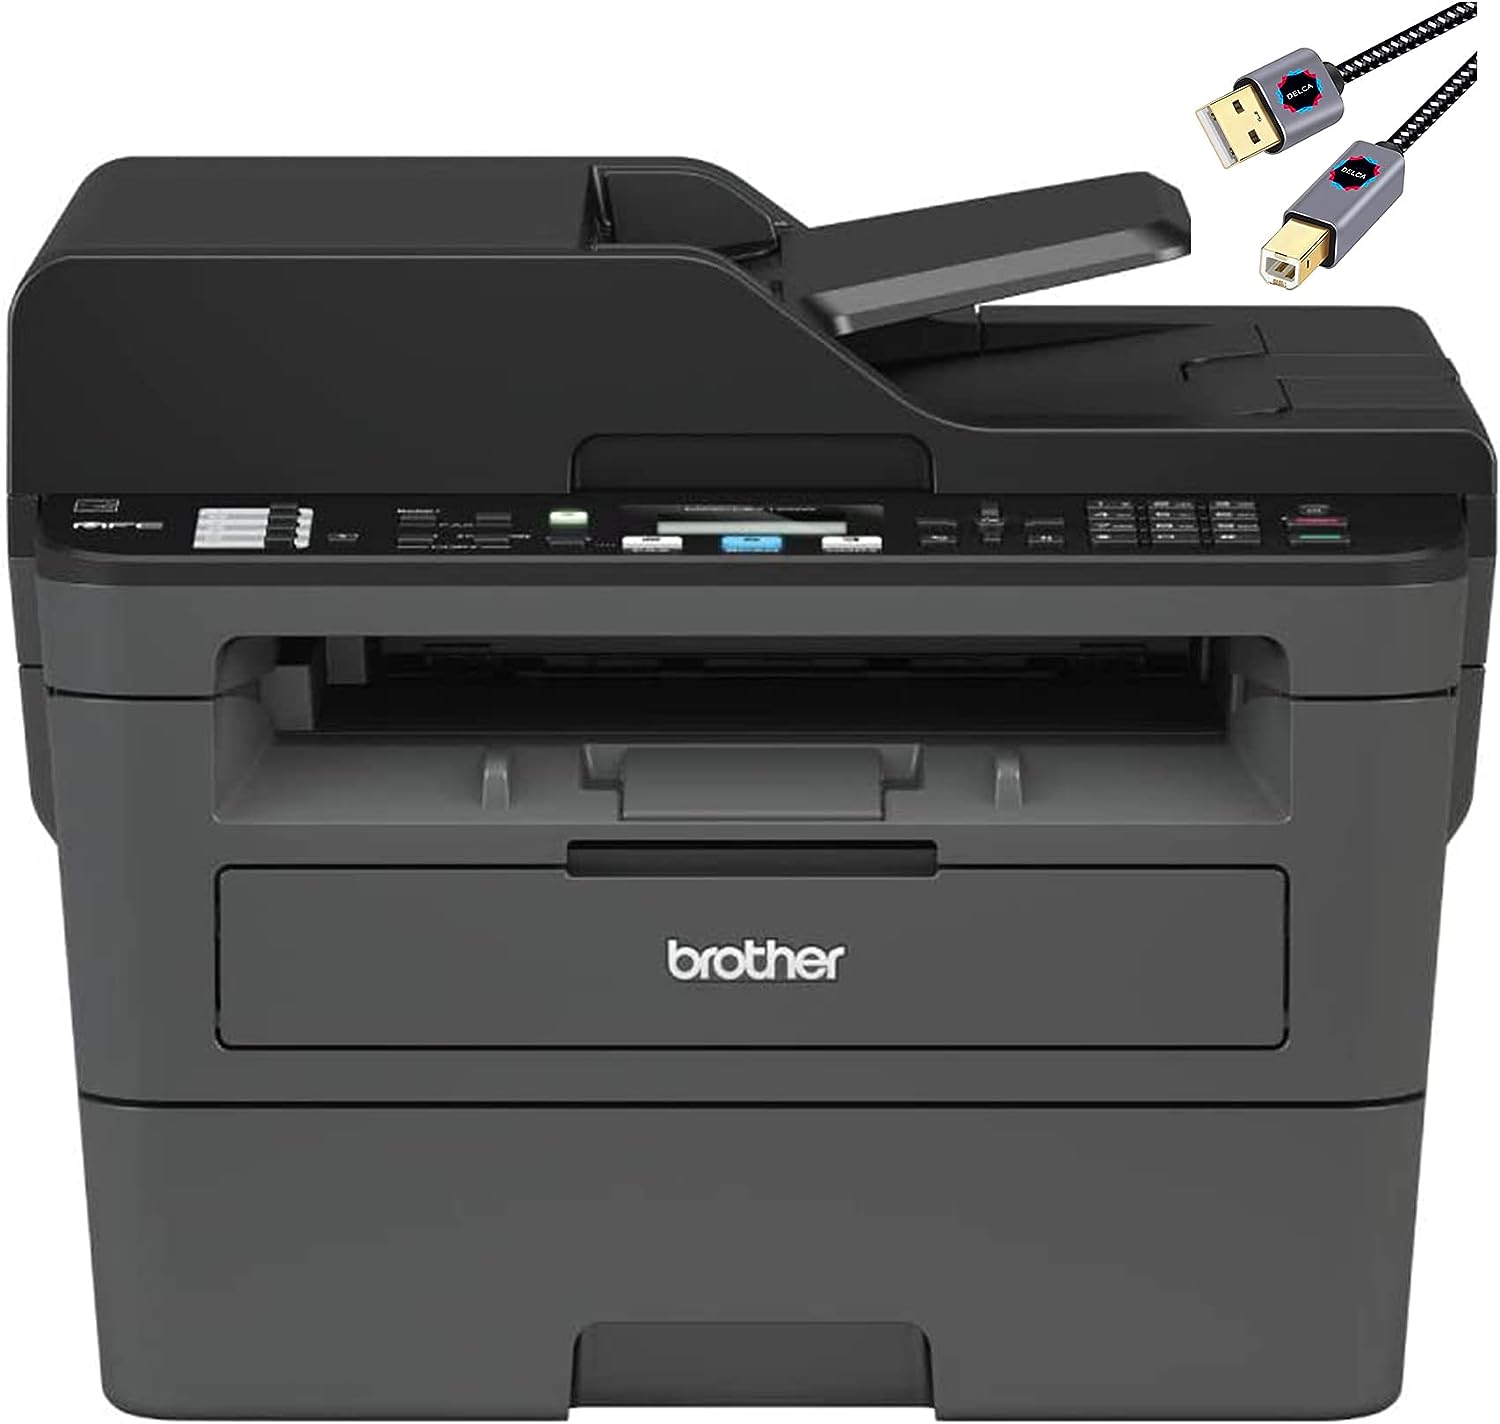 Brother L-2710DW Series Compact Monochrome All-in-One [...]